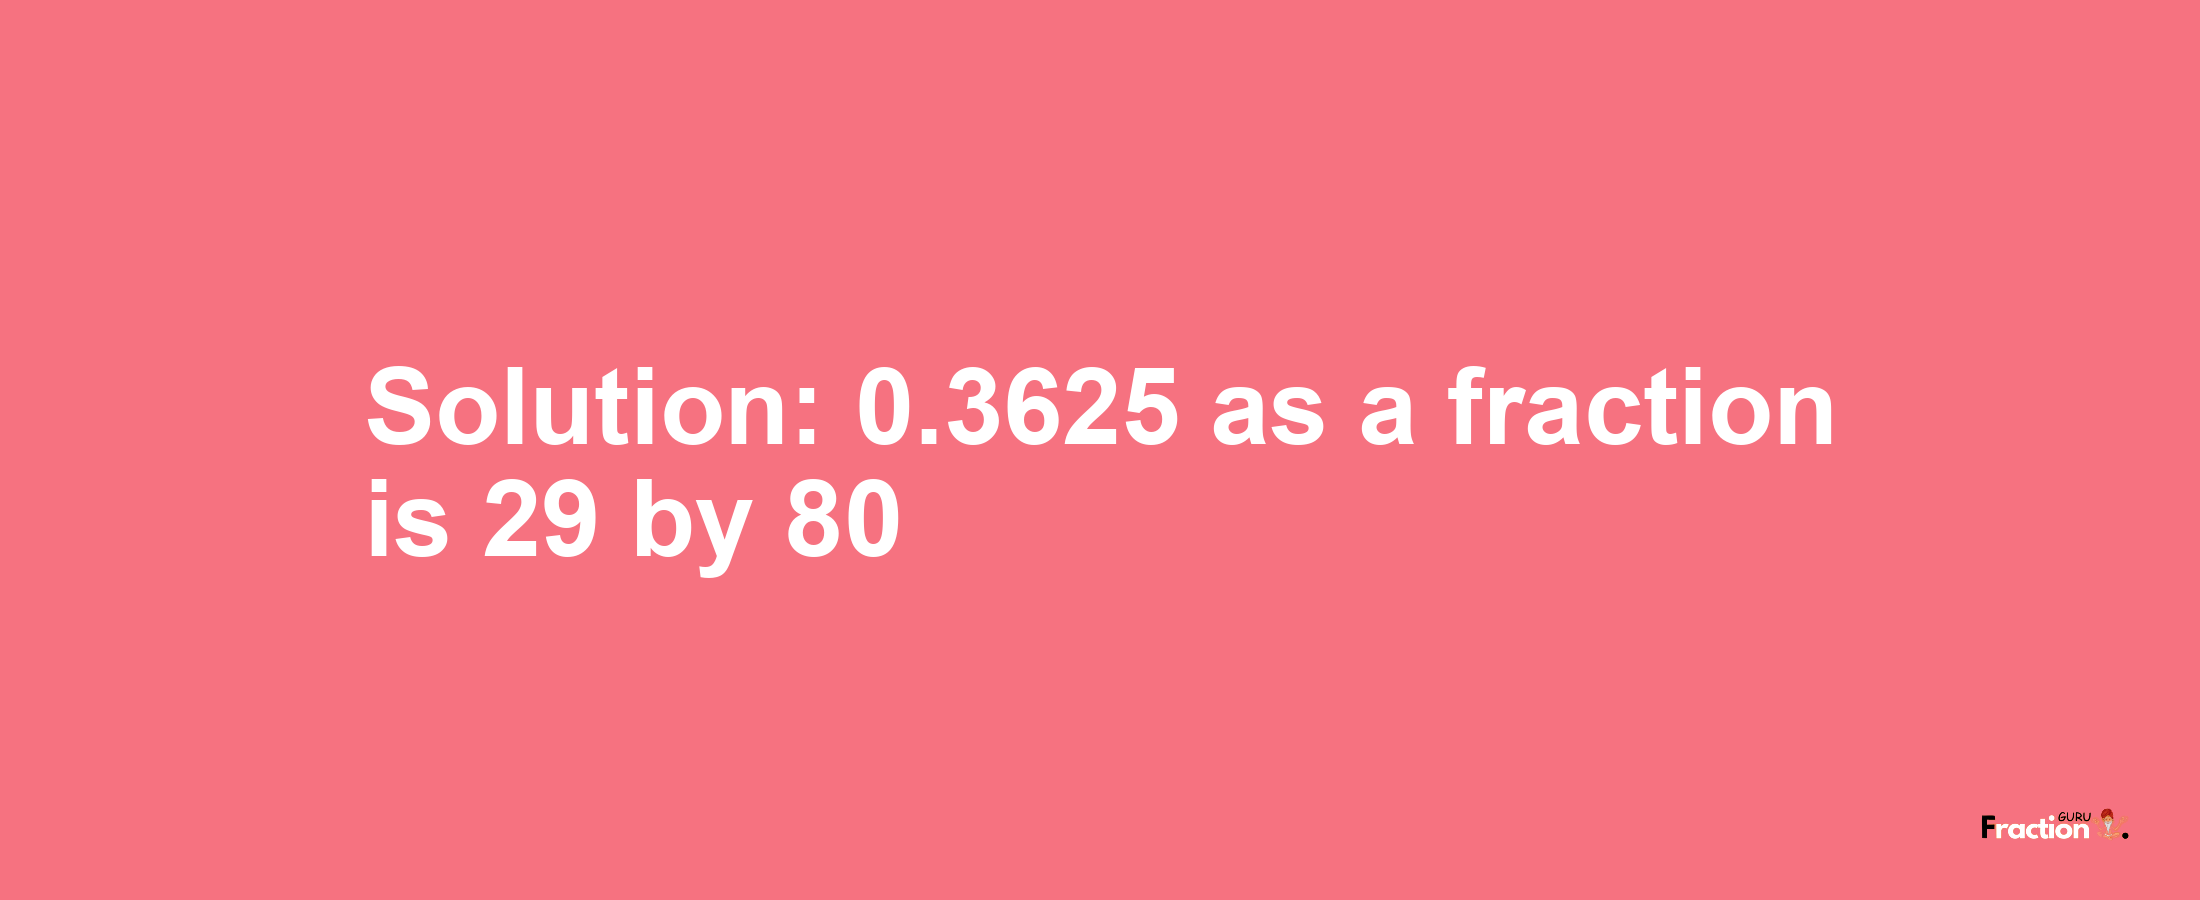 Solution:0.3625 as a fraction is 29/80